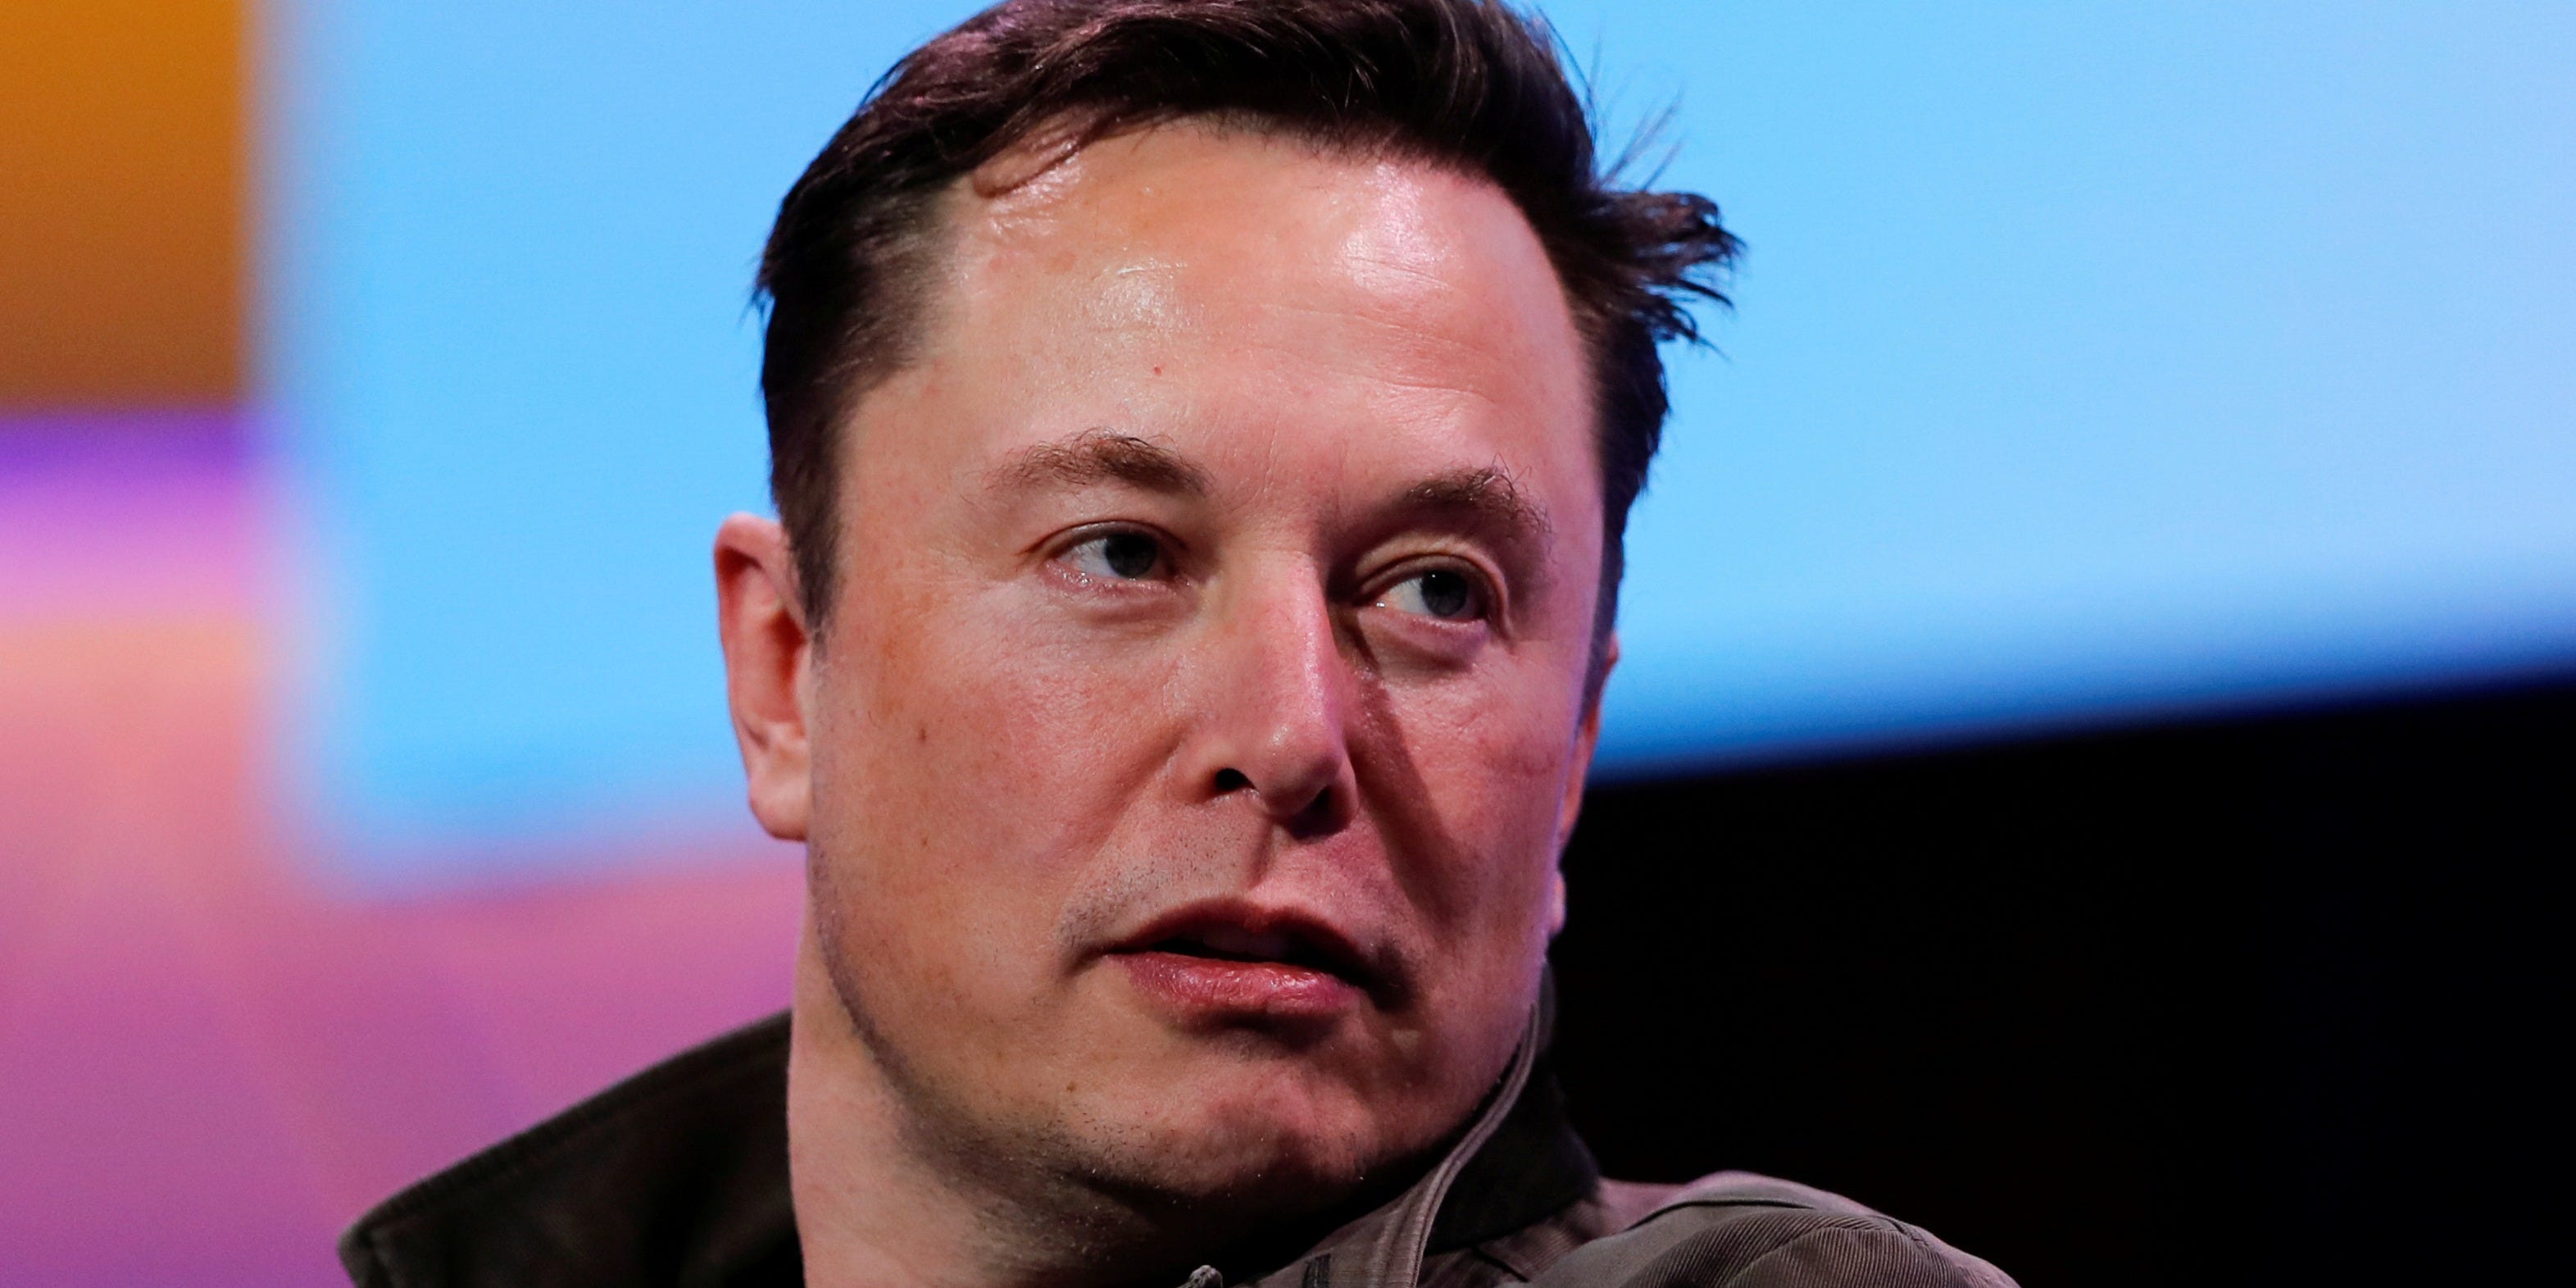 Elon Musk announced Juneteenth is a holiday for Tesla and SpaceX employees in the middle of their shift, without allowing them paid time off